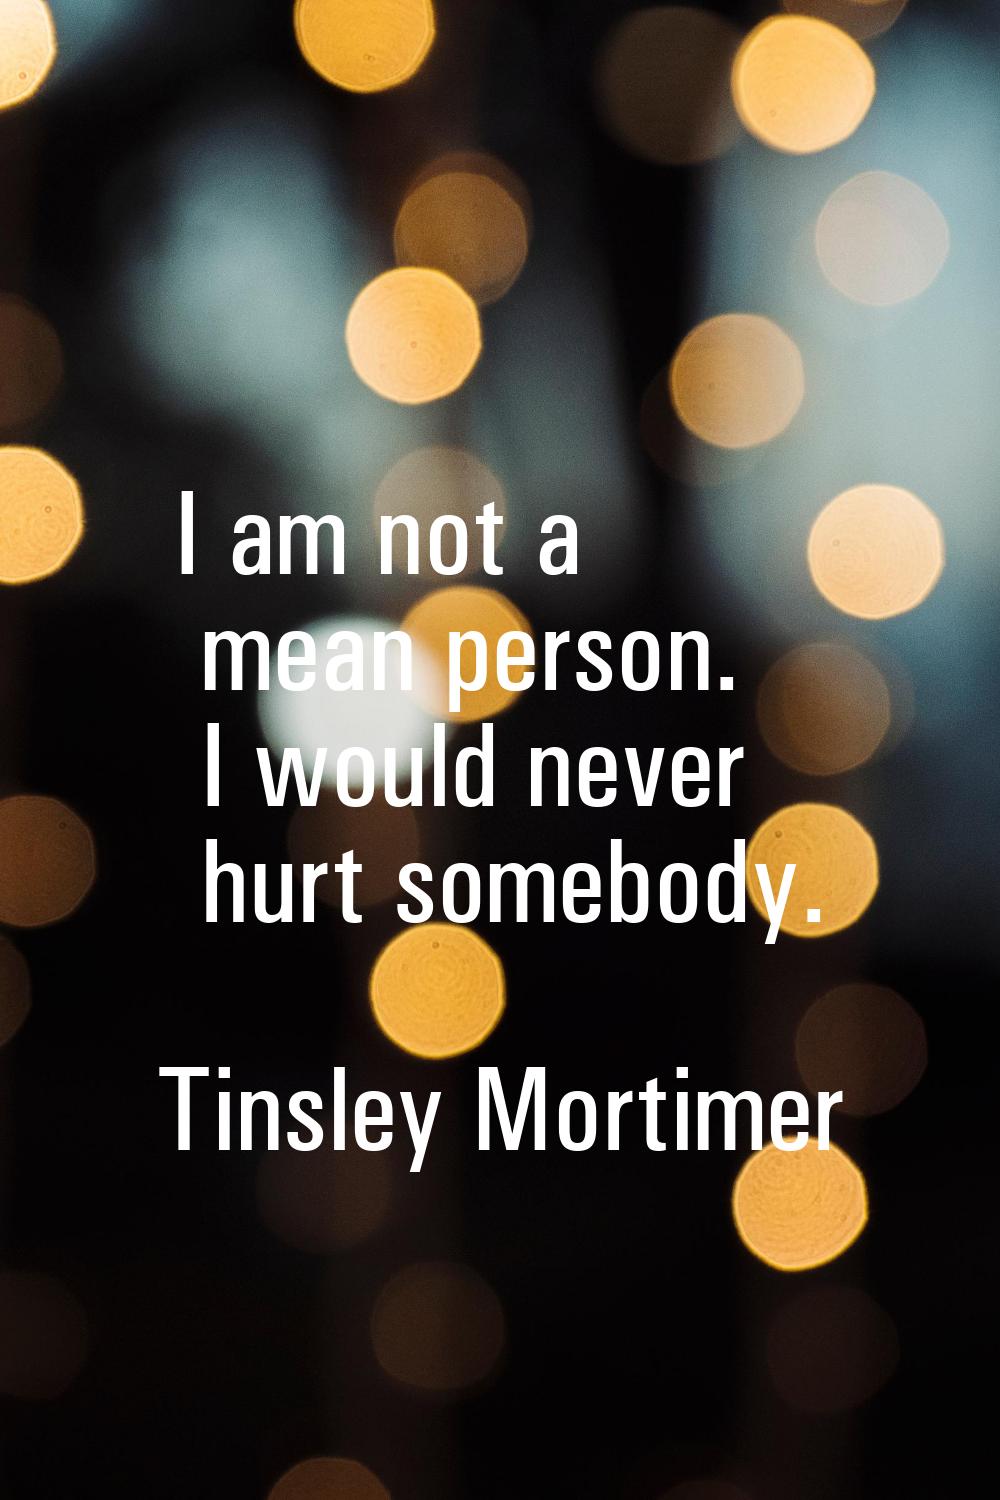 I am not a mean person. I would never hurt somebody.